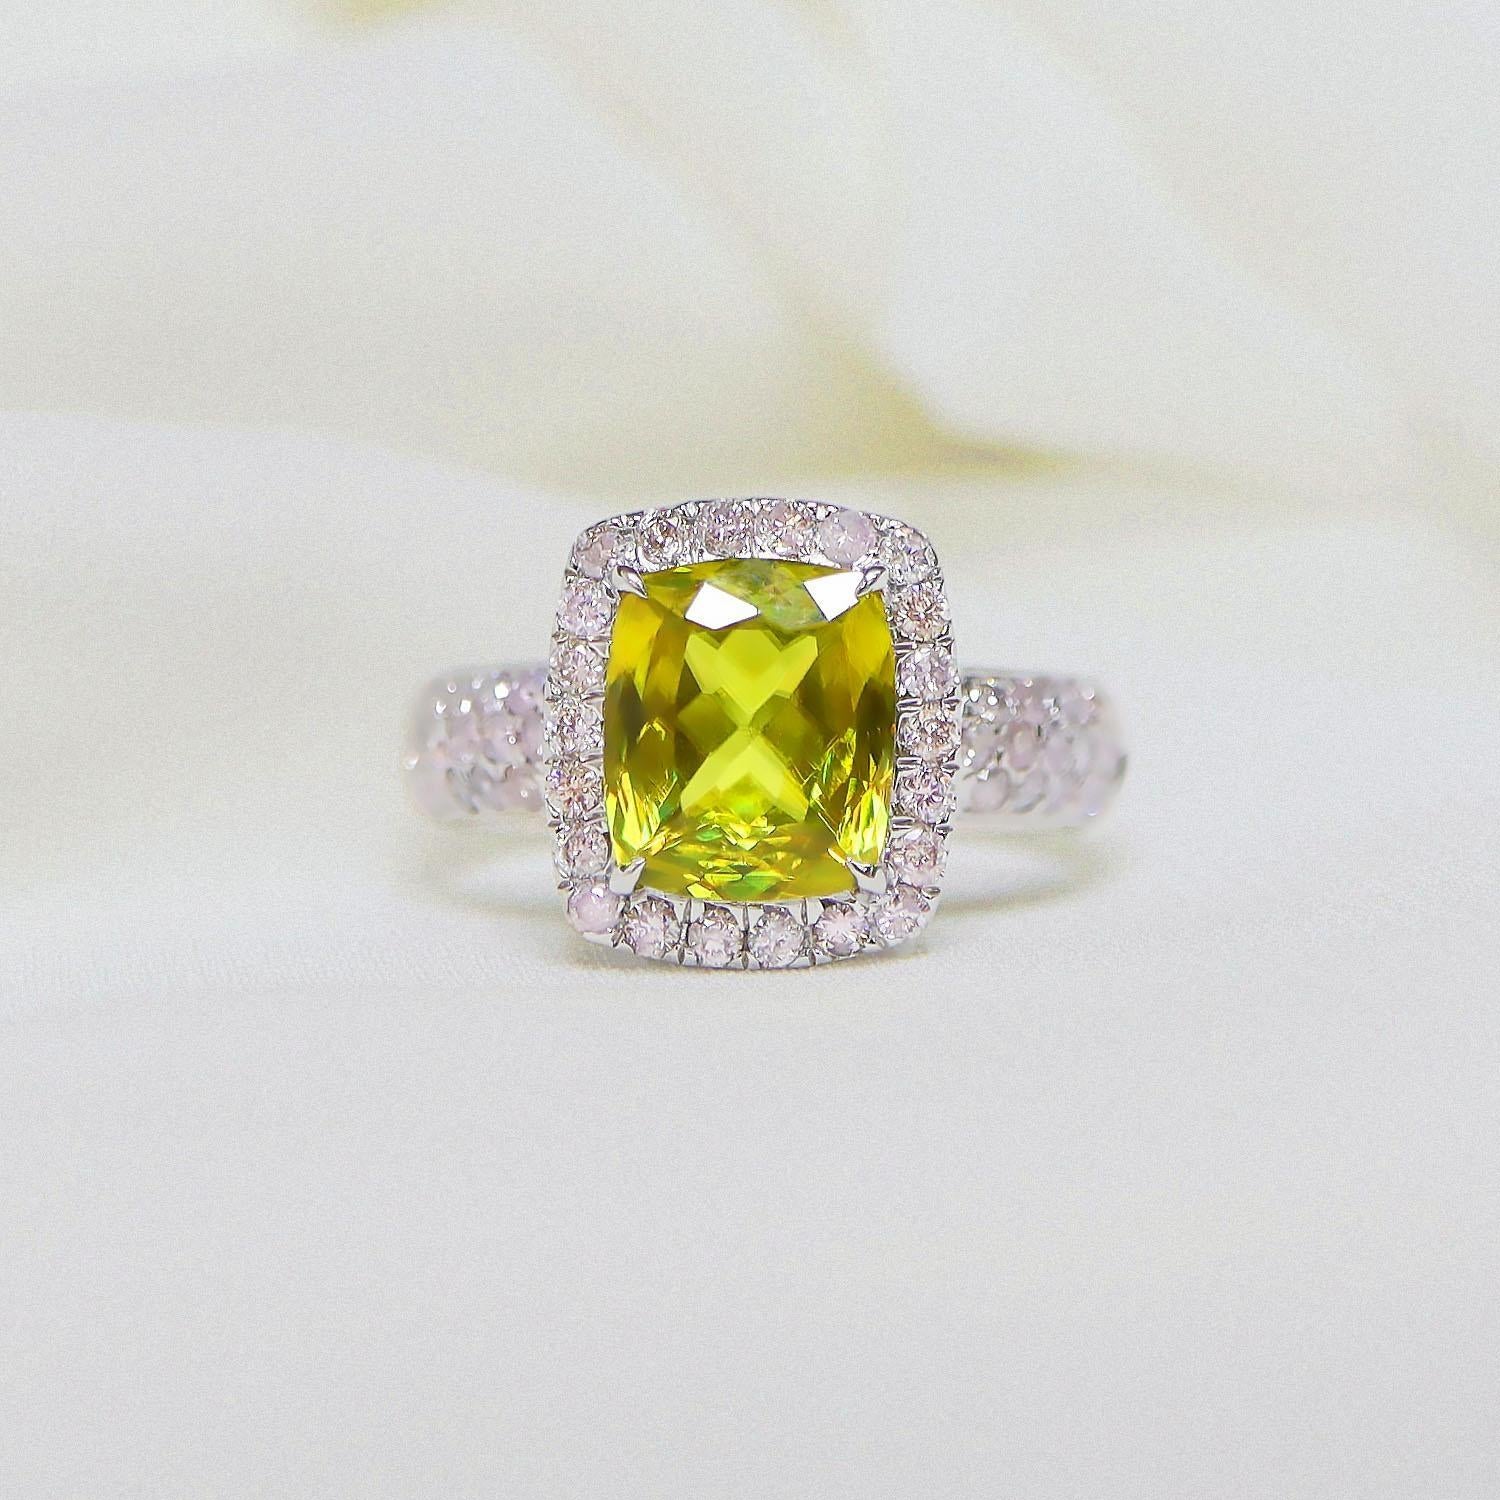 *IGI 14K 2.10 Ct  Sphene&Pink Diamonds Antique Art Deco Style Engagement Ring*

Natural Intensive greenish-yellow Sphene weighing 2.10 ct set on the 14K white gold pave' design band with natural round brilliant cut pink diamonds weighing 0.64